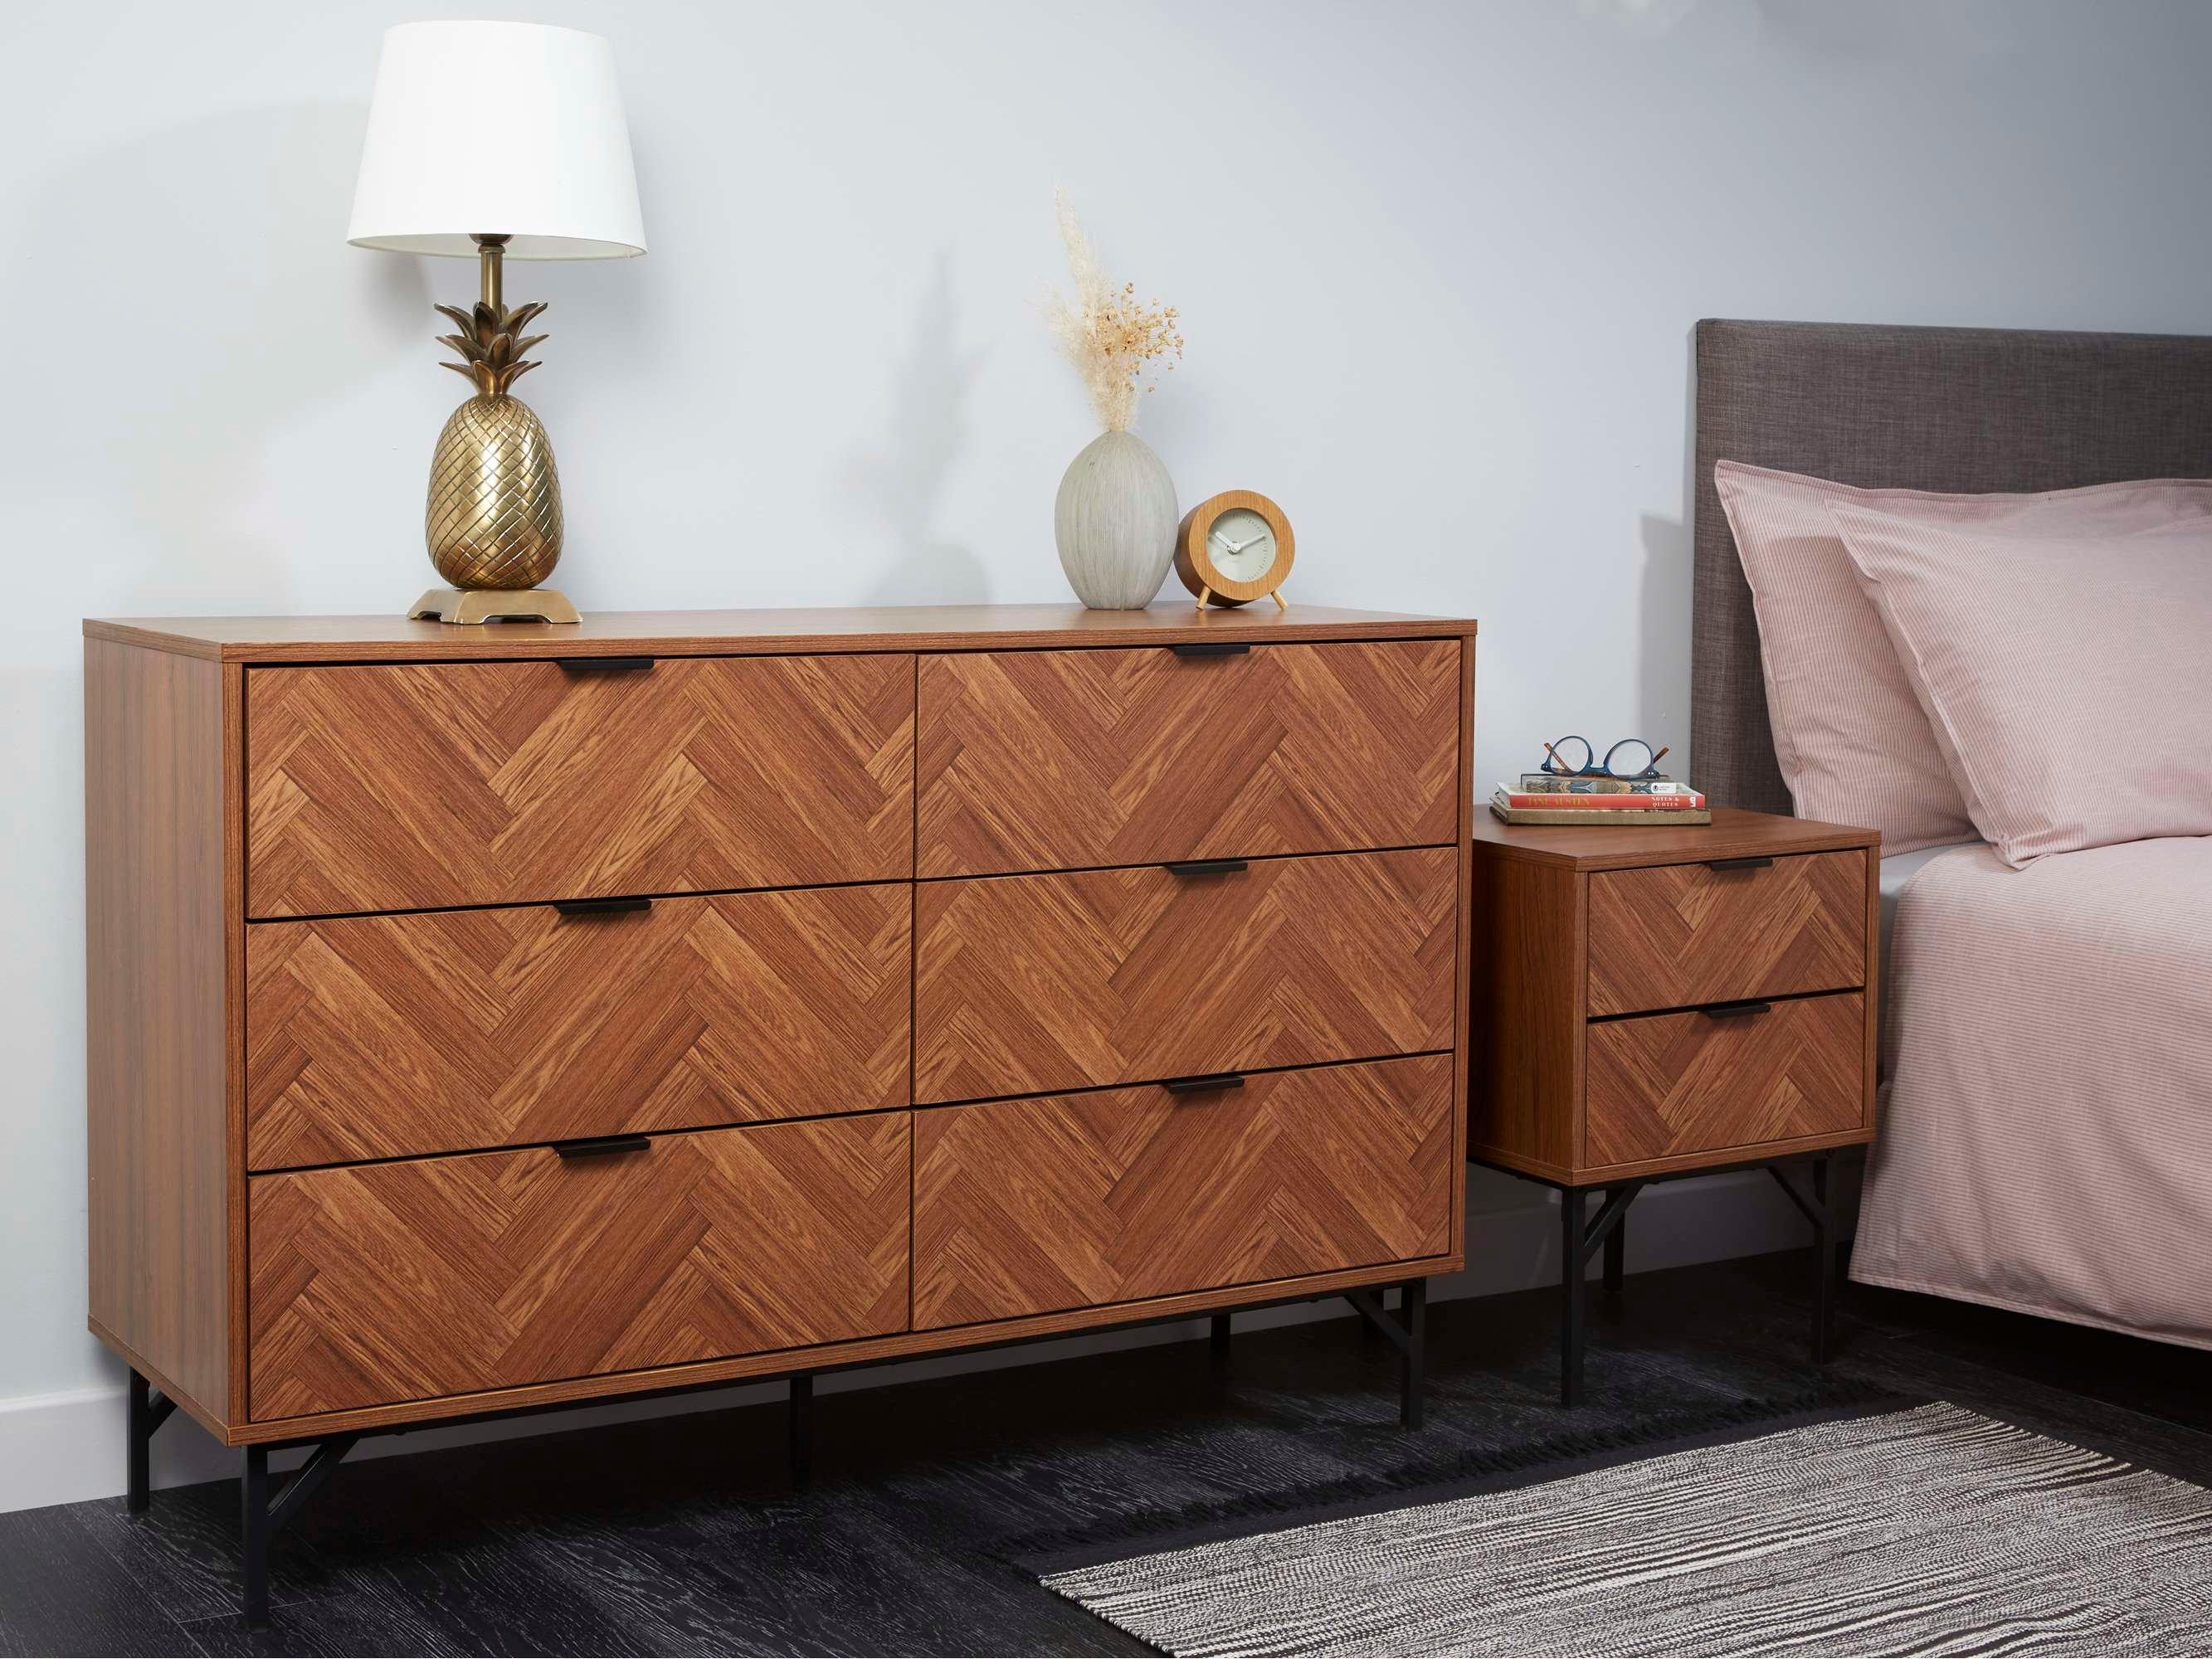 Dark Chevron 6 Drawer Bedroom Chest of Drawers with Metal Legs